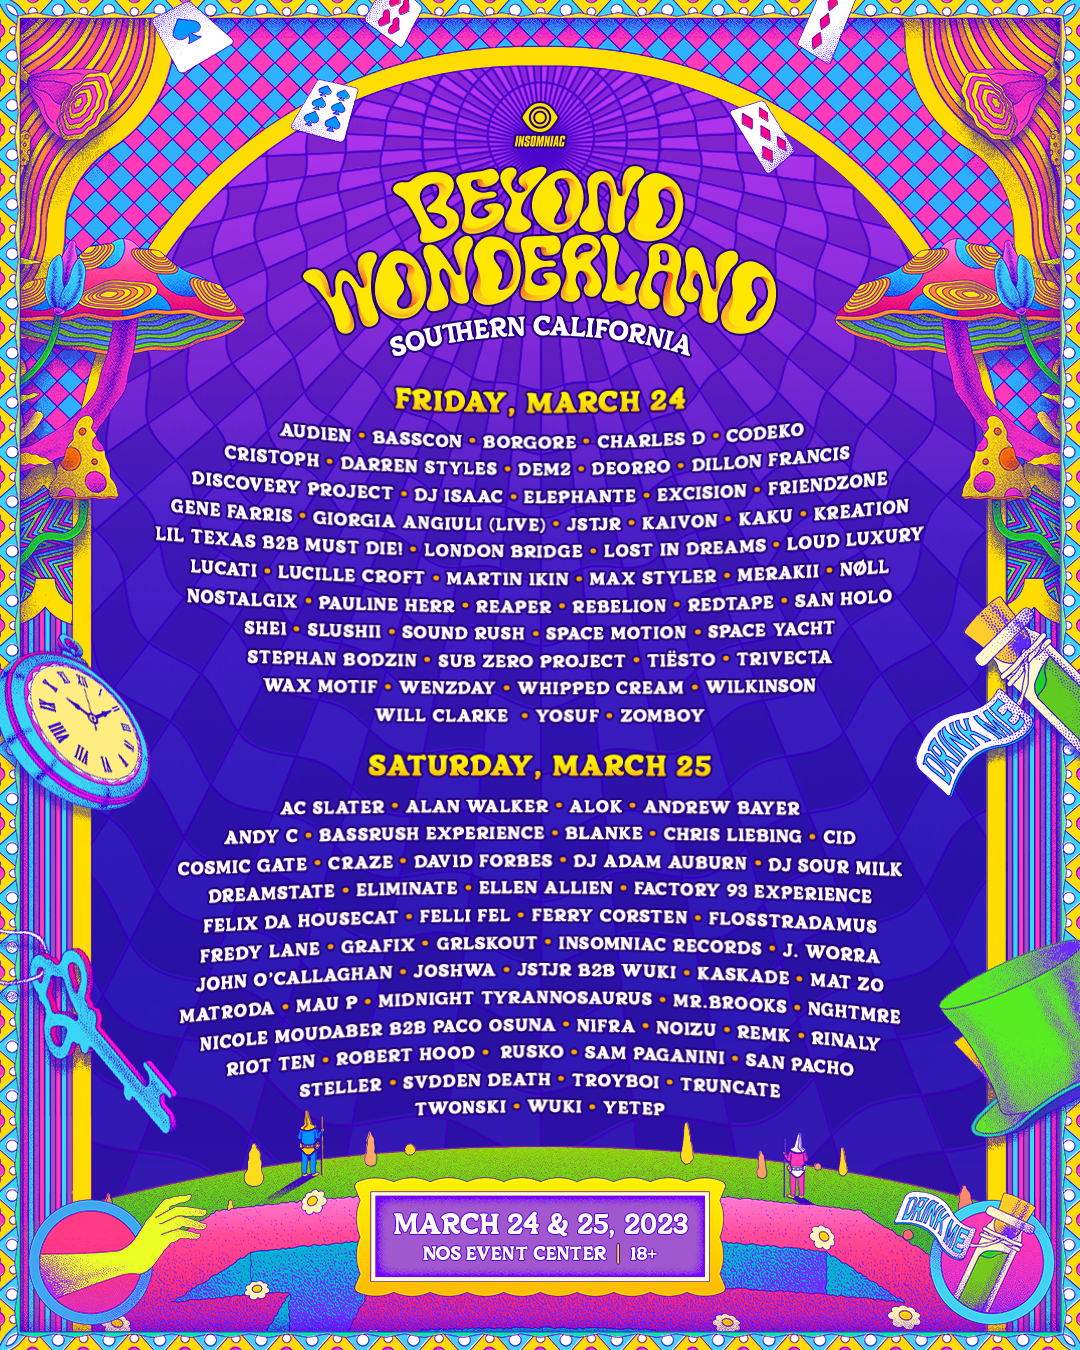 Lineup By Day